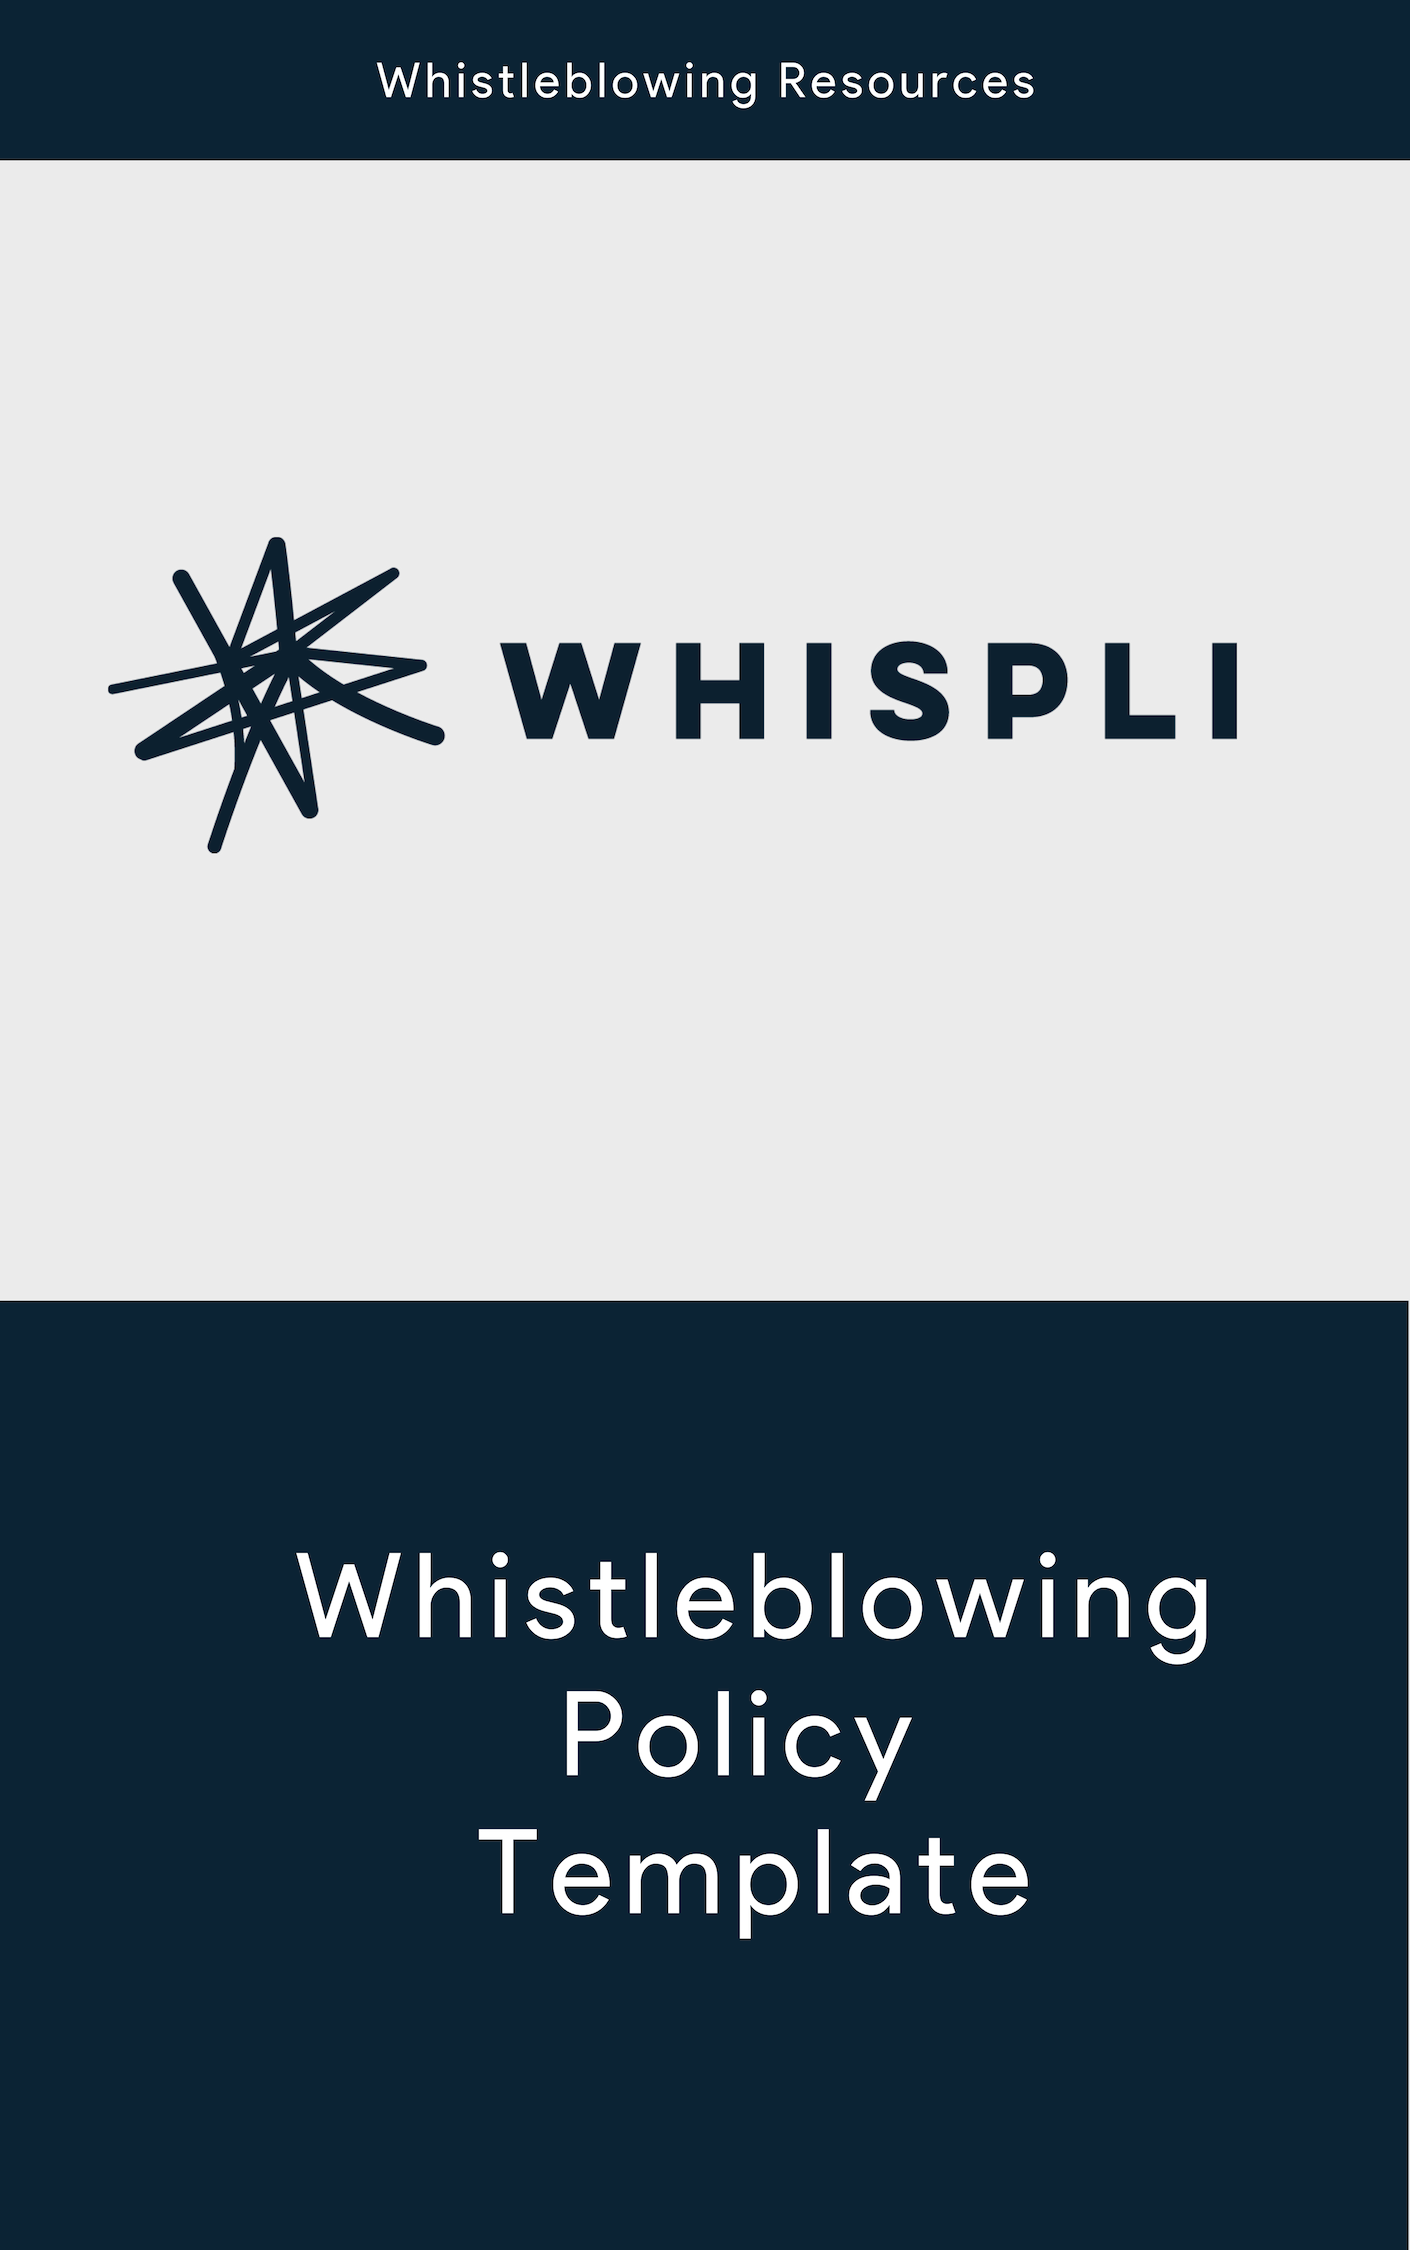 Whistleblowing Policy Template Whispli